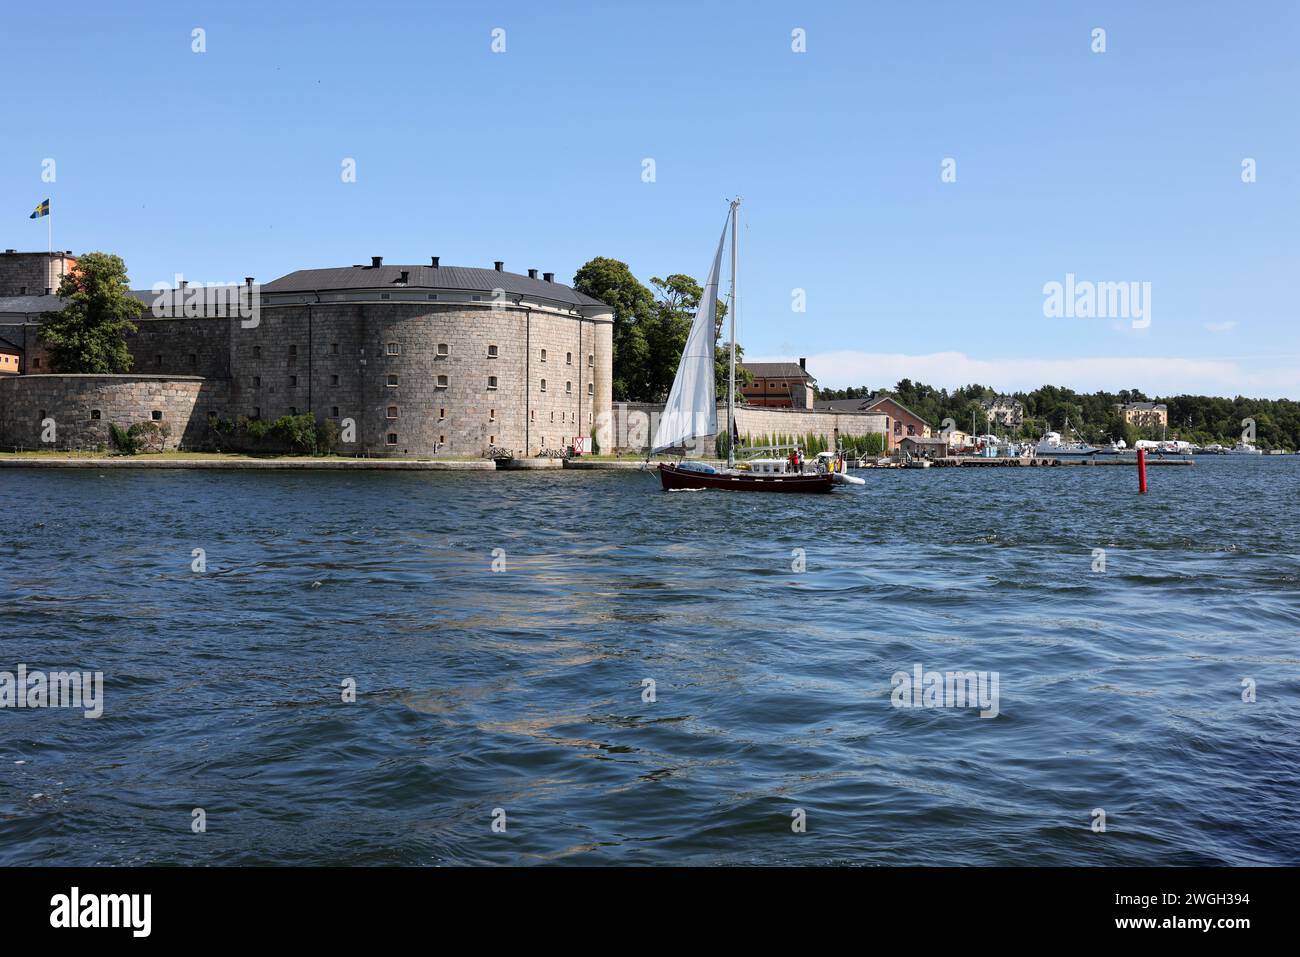 Vaxholm, Sweden - July 27, 2023: Vaxholm Fortress, also known as Vaxholm Castle, is a historic fortification on the island of Vaxholmen in the Stockho Stock Photo